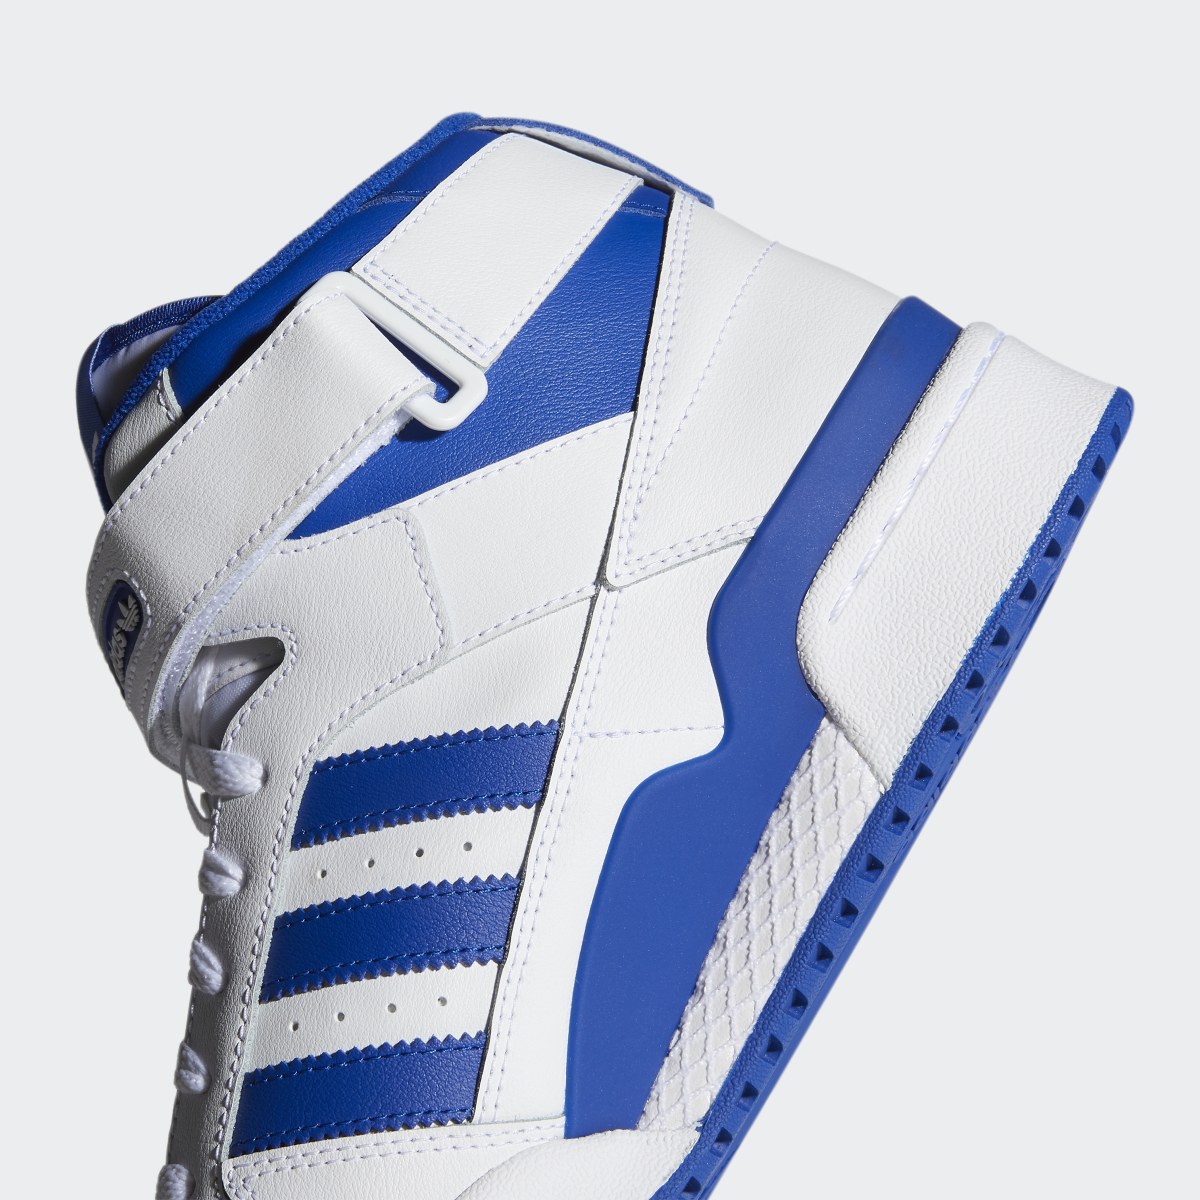 Adidas Forum Mid Shoes. 10